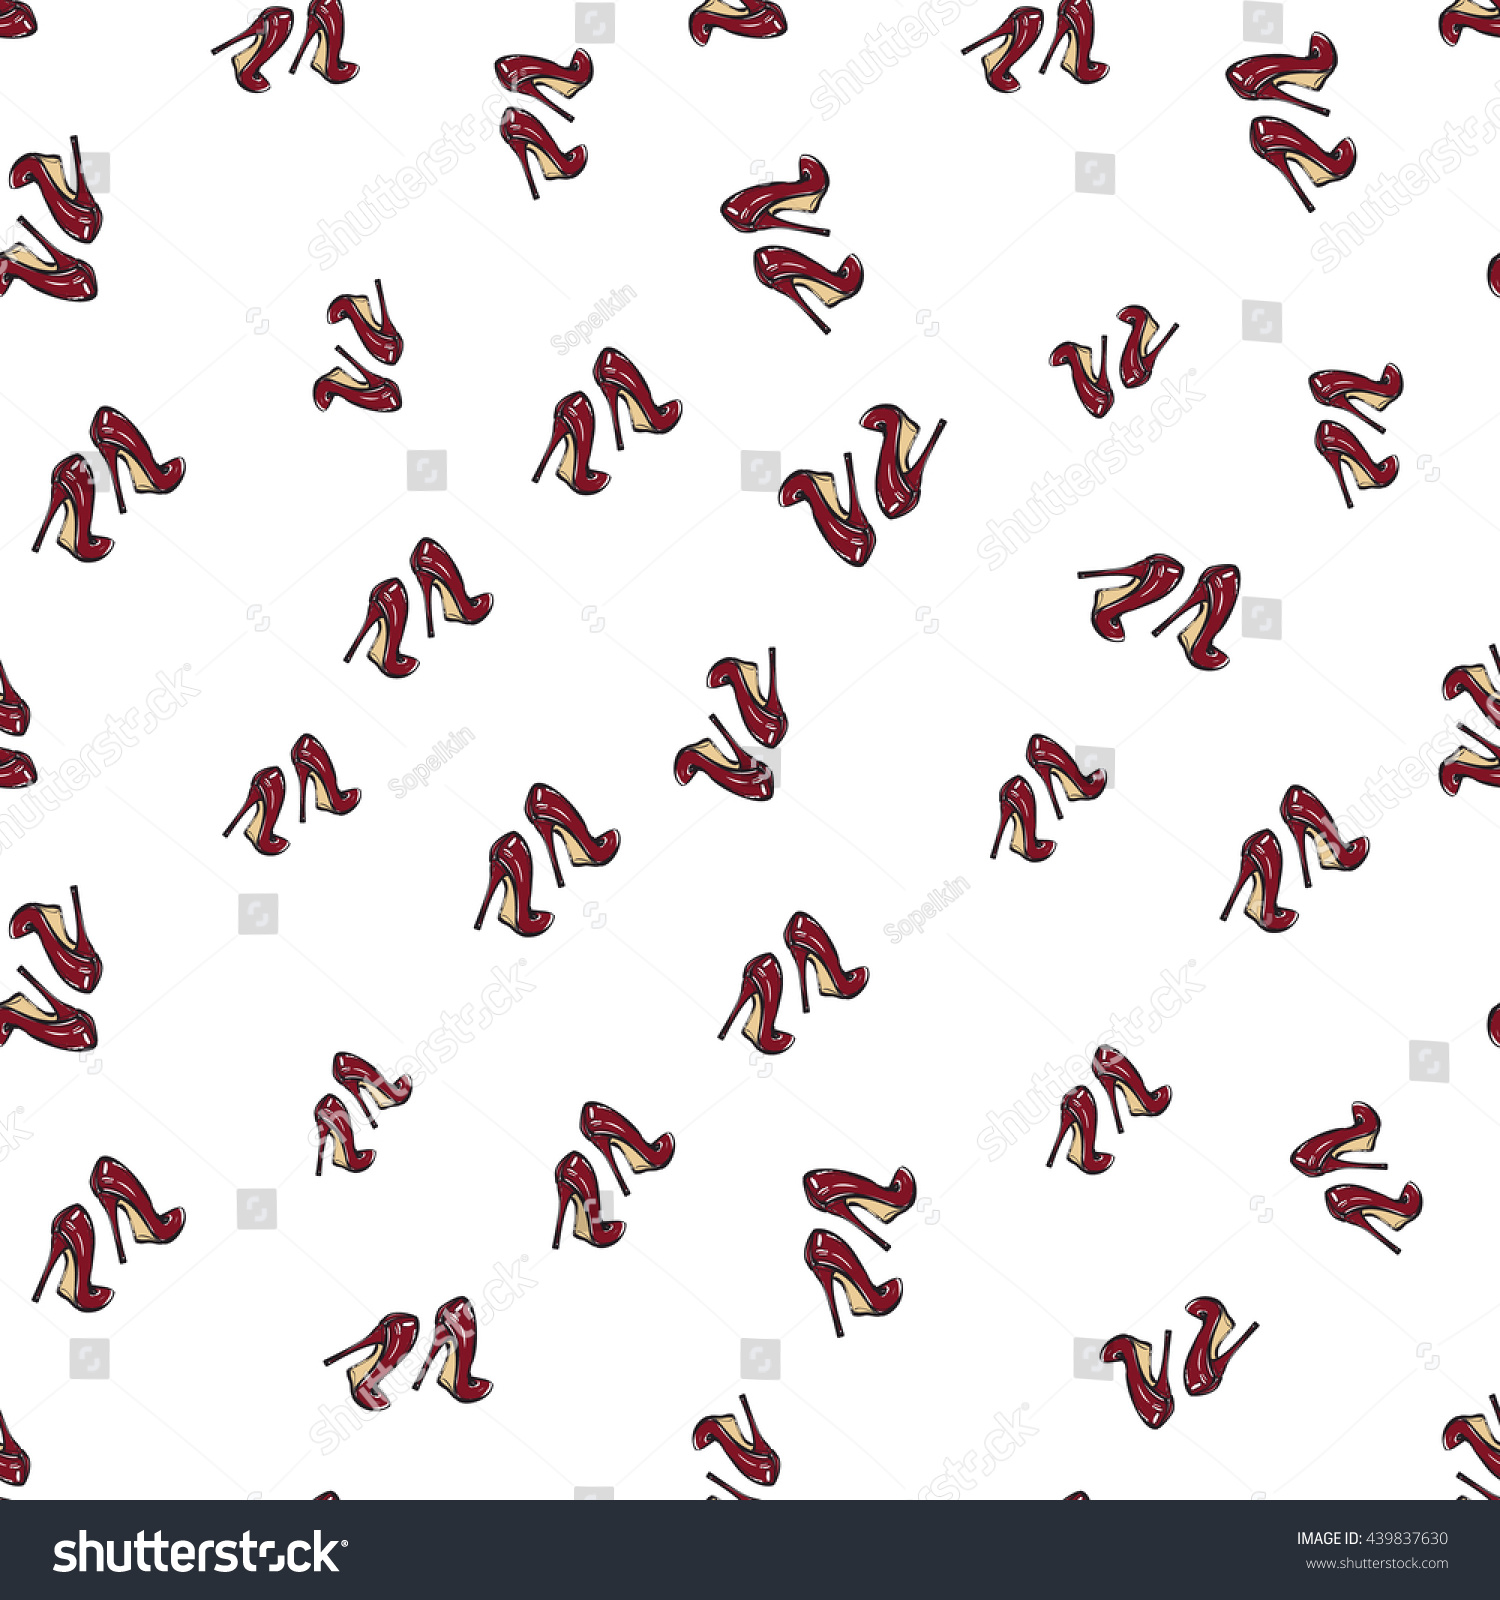 Vector fashion sketch. Hand drawn graphic wine heels. Contrasty glamour fashion seamless pattern in vogue style. Isolated elements on white background #439837630